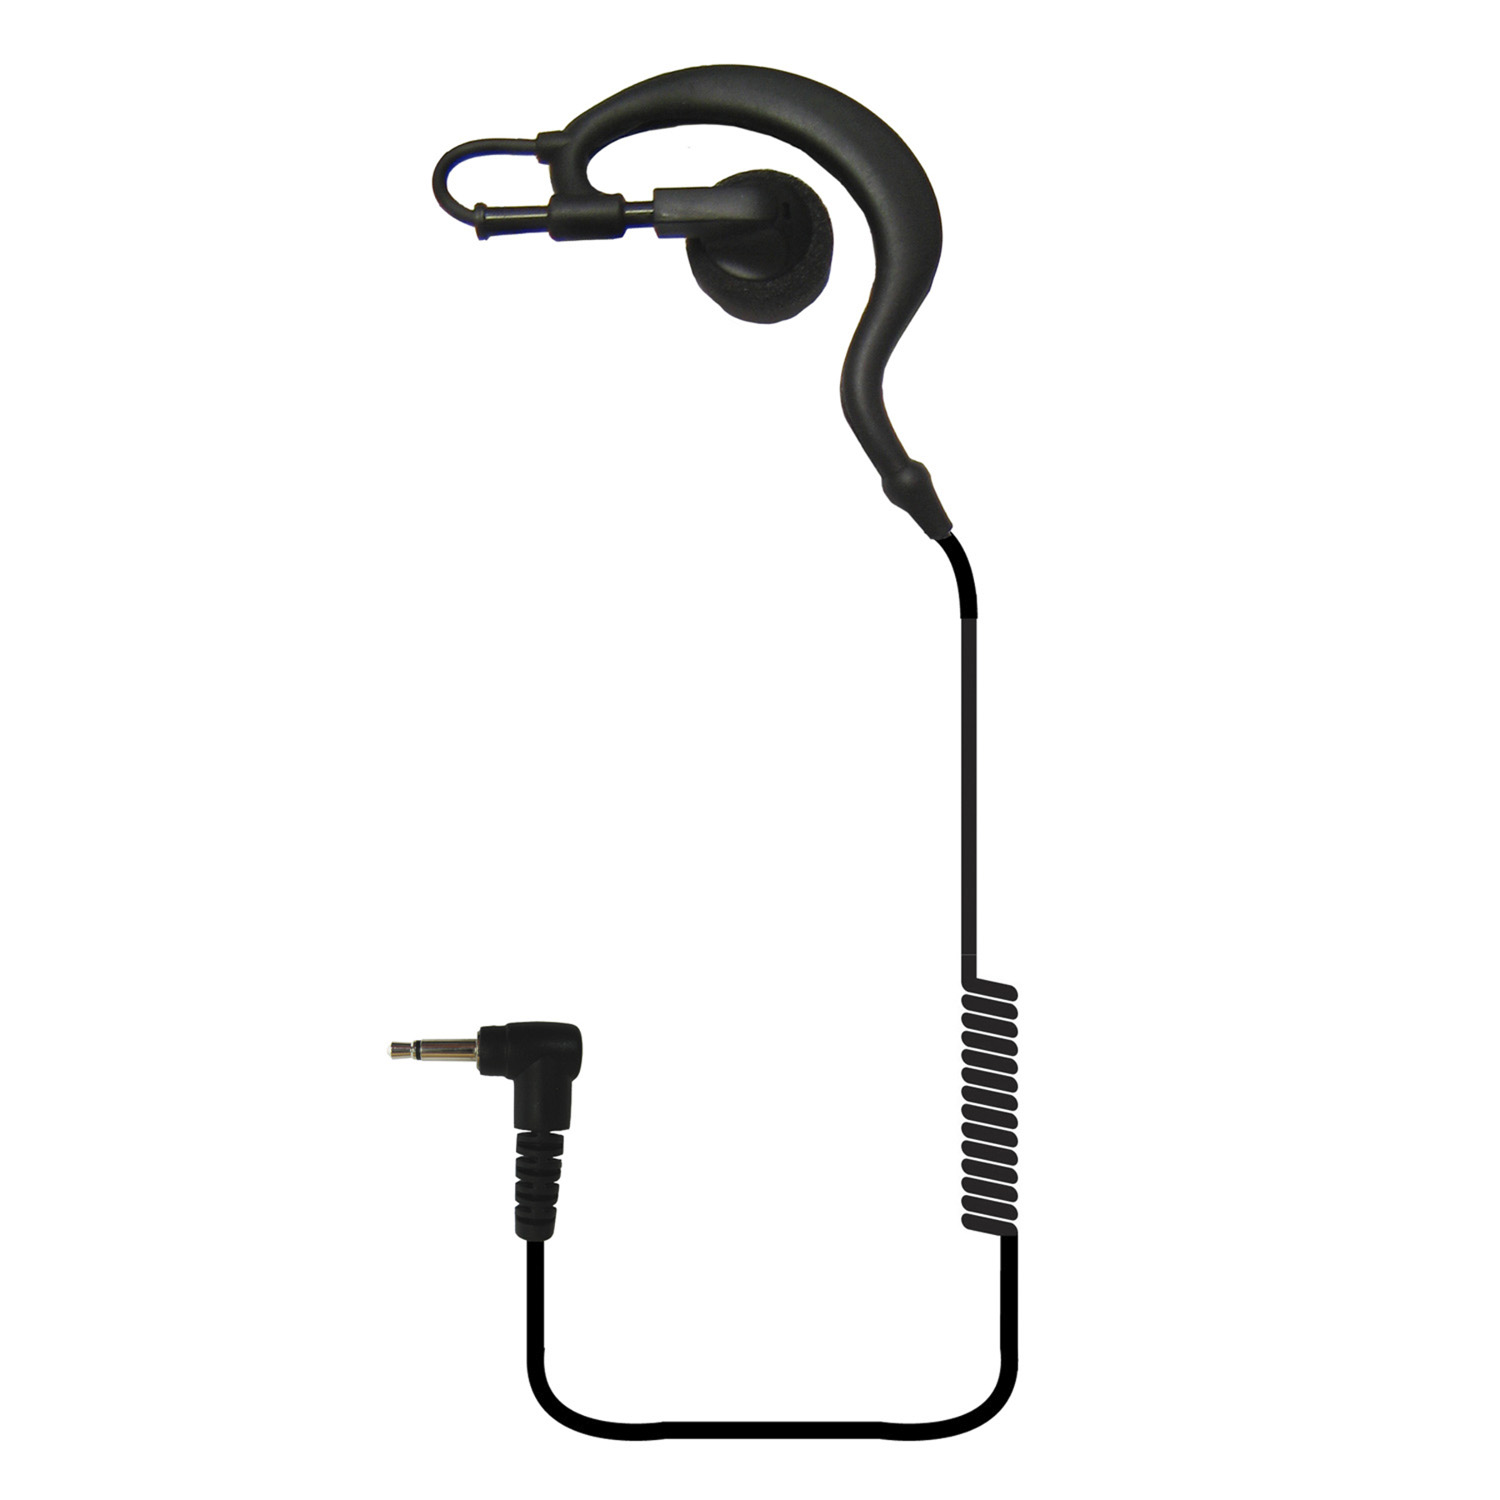 Code Red Guard JR Listen Only Earpiece with 3.5mm Connector